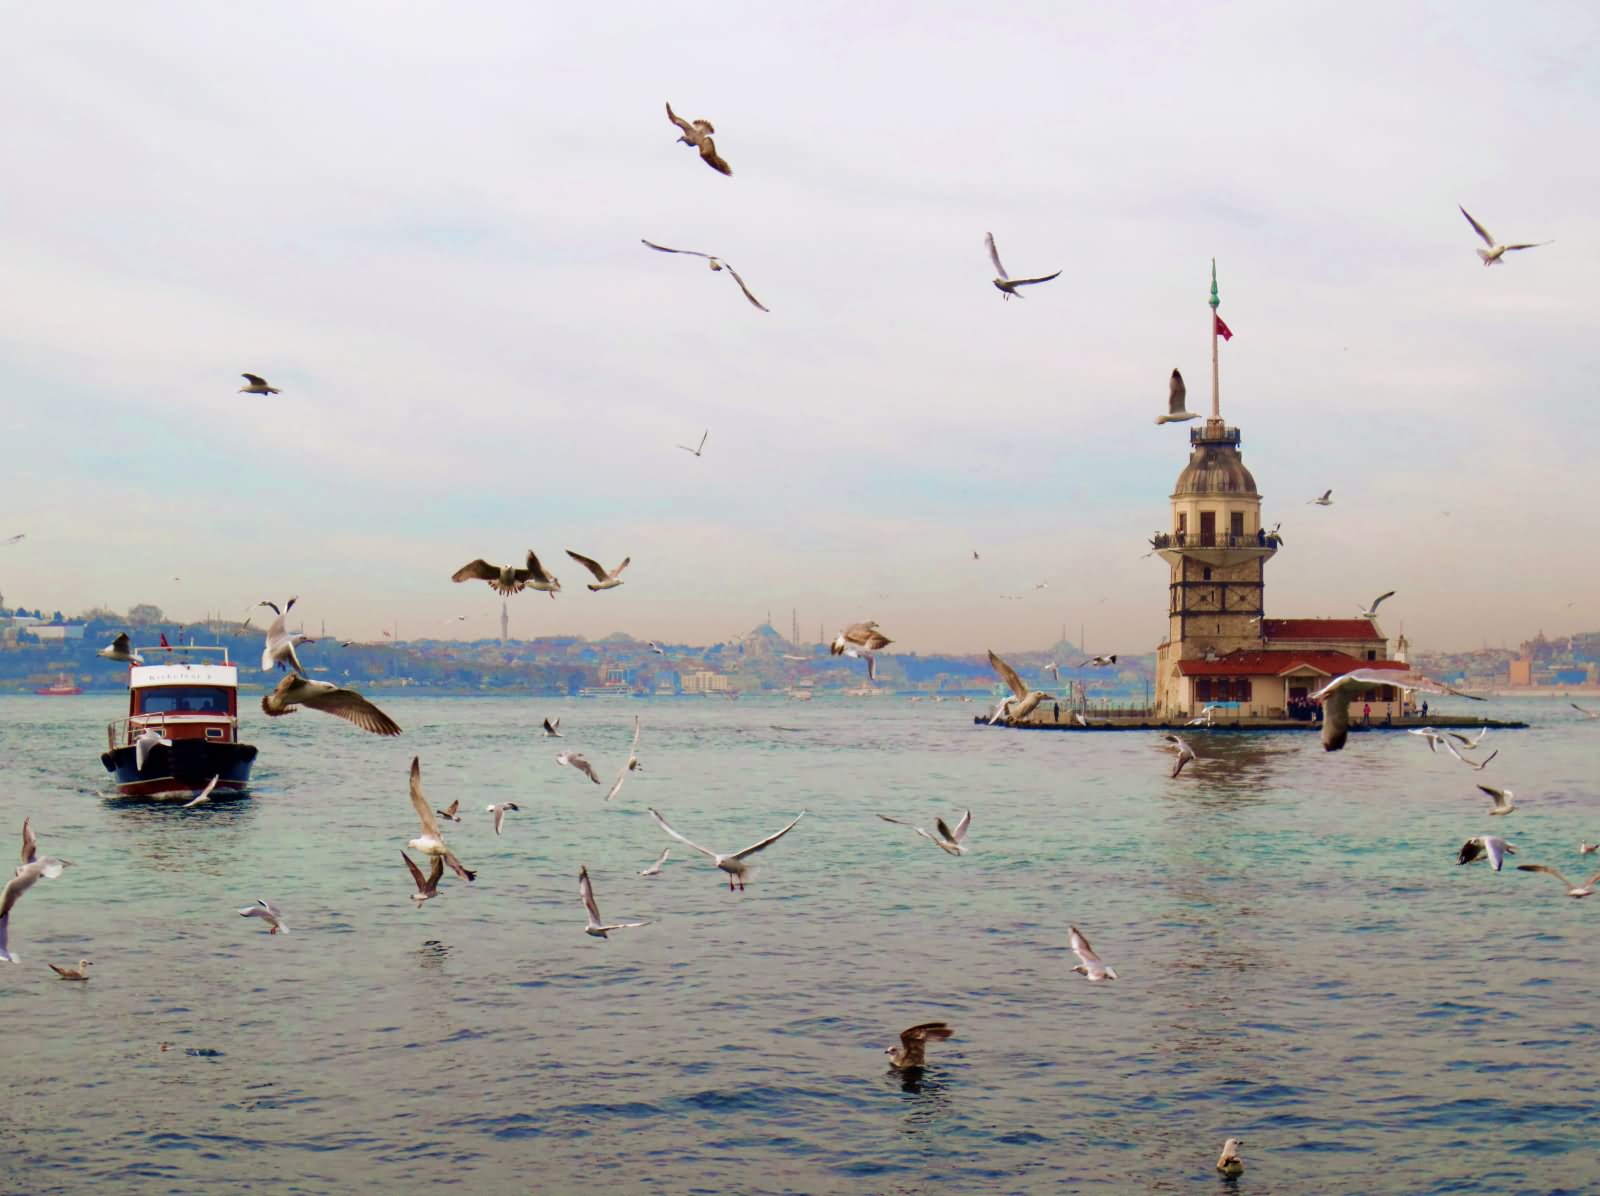 Flying Birds Near The Maiden's Tower